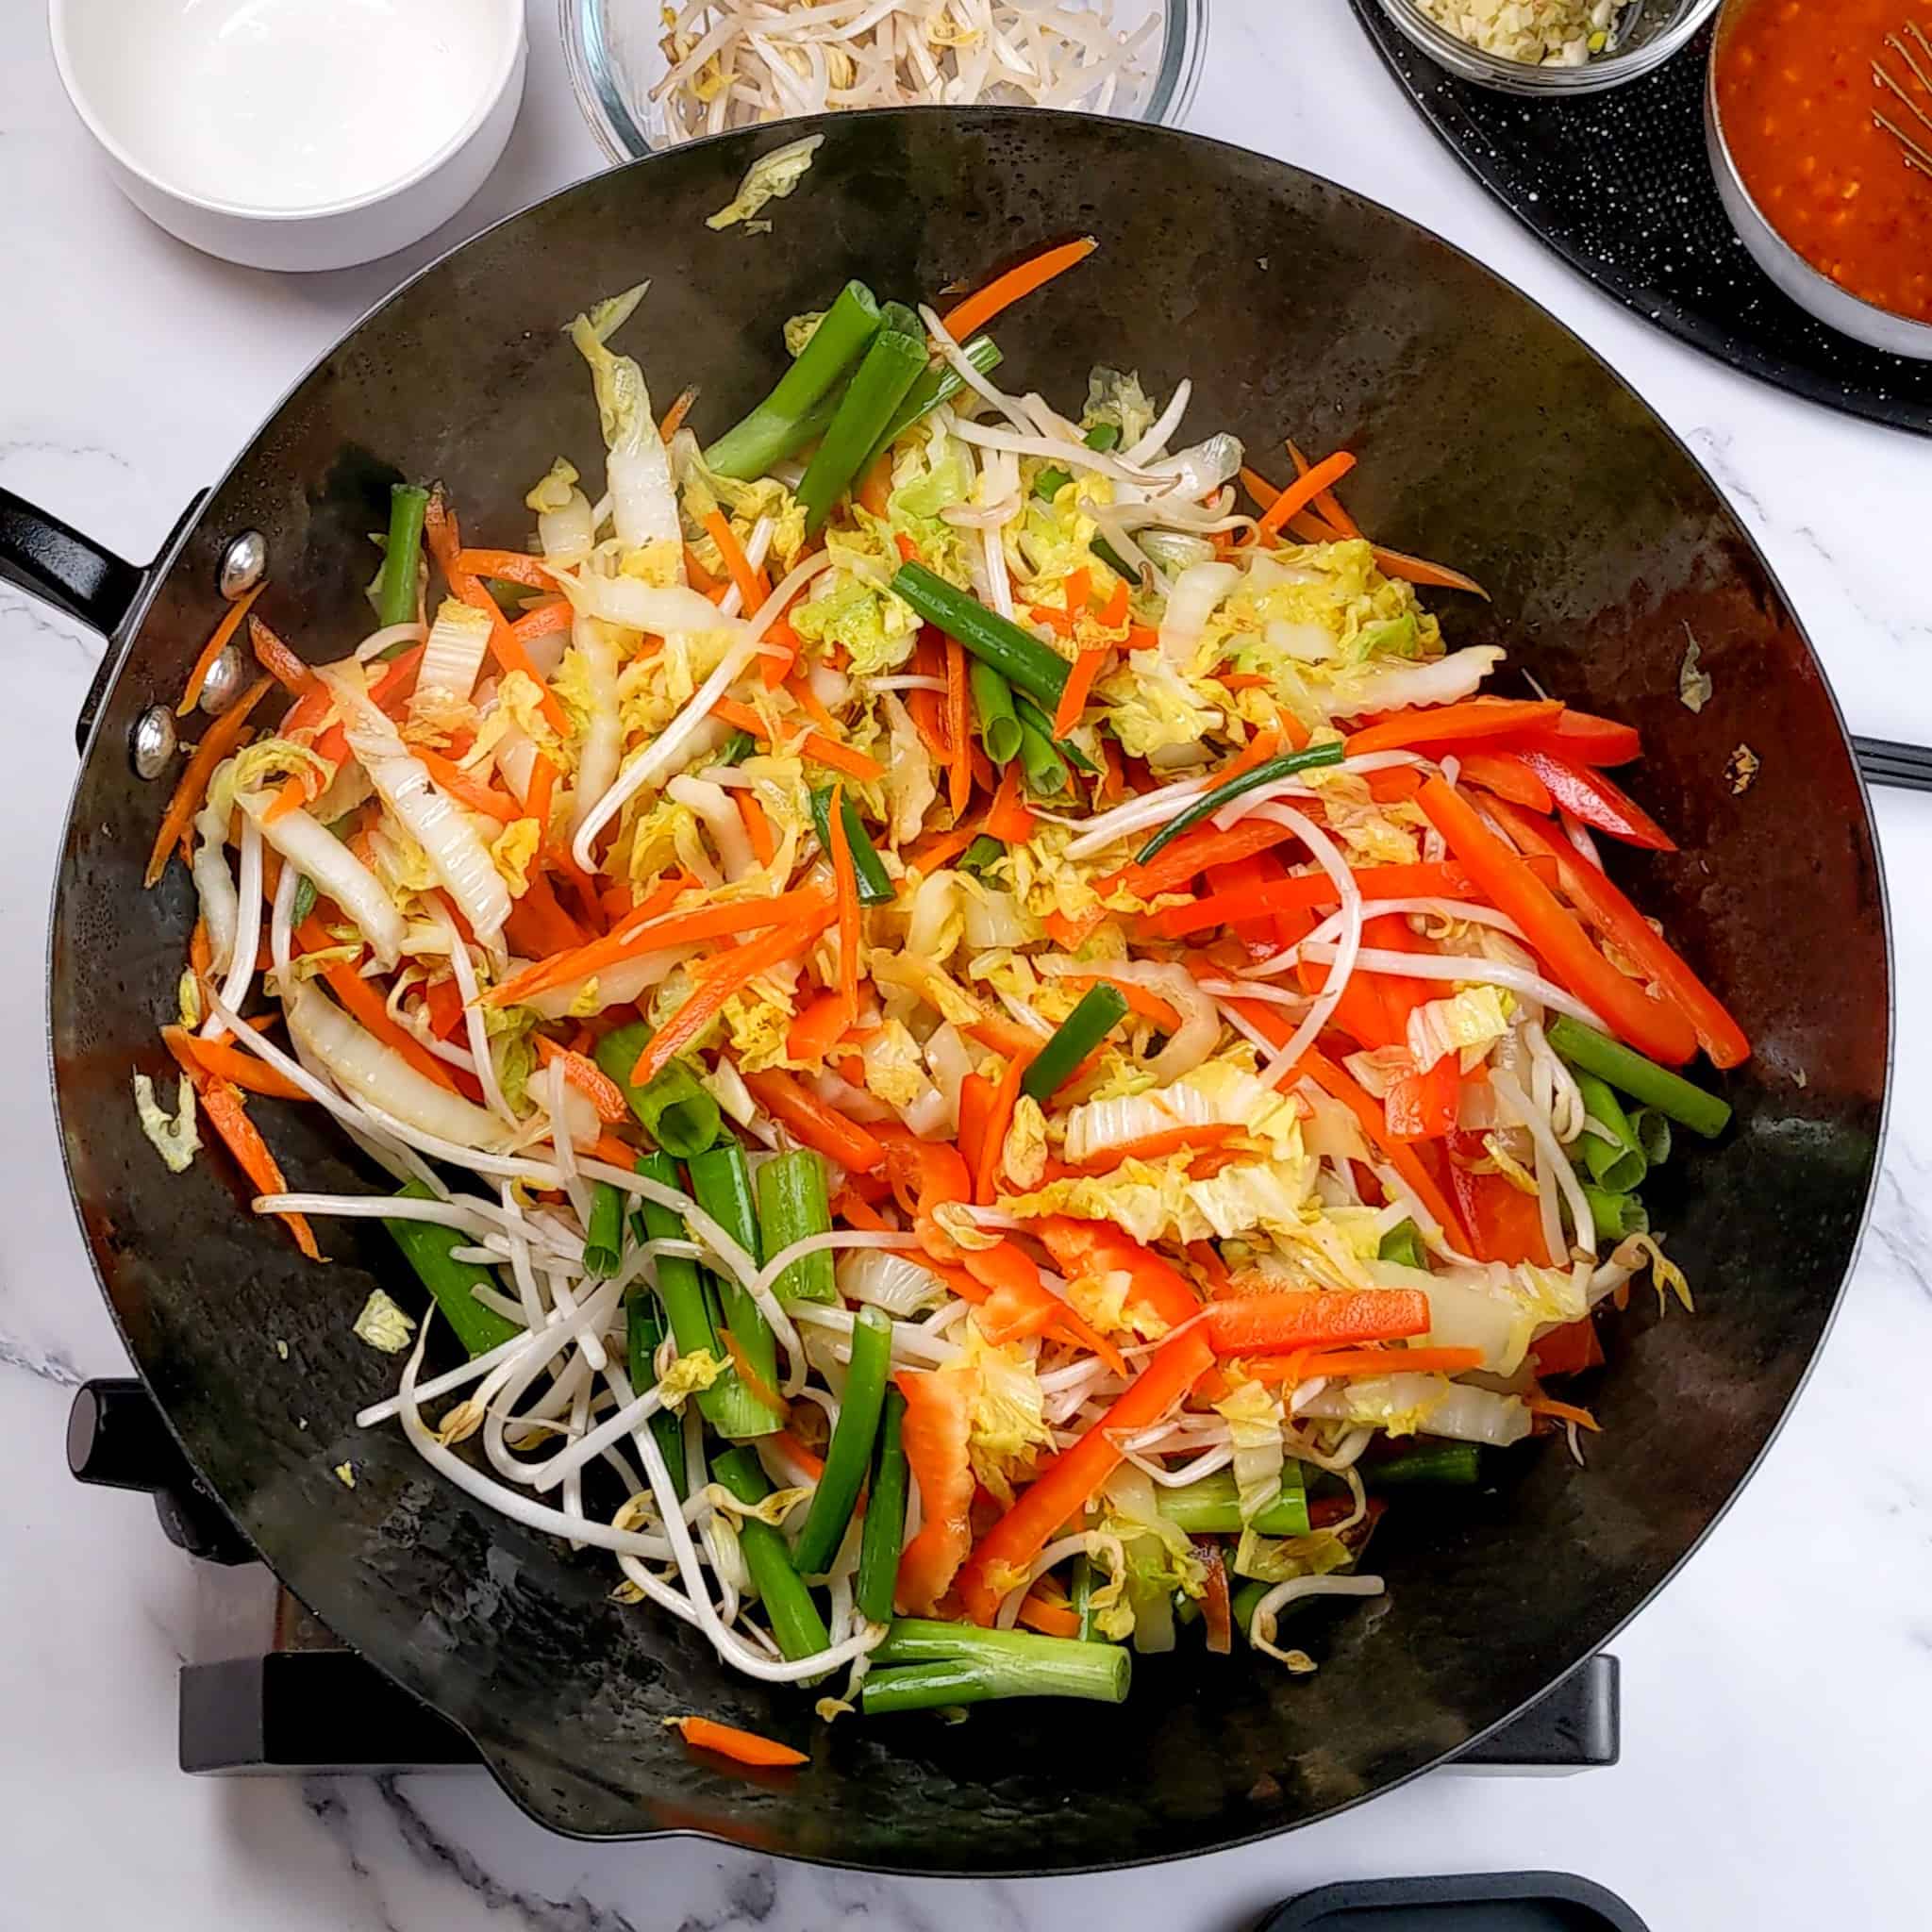 raw red bell pepper, scallions, and bean sprouts, added to the nappa cabbage and carrots in a wok.